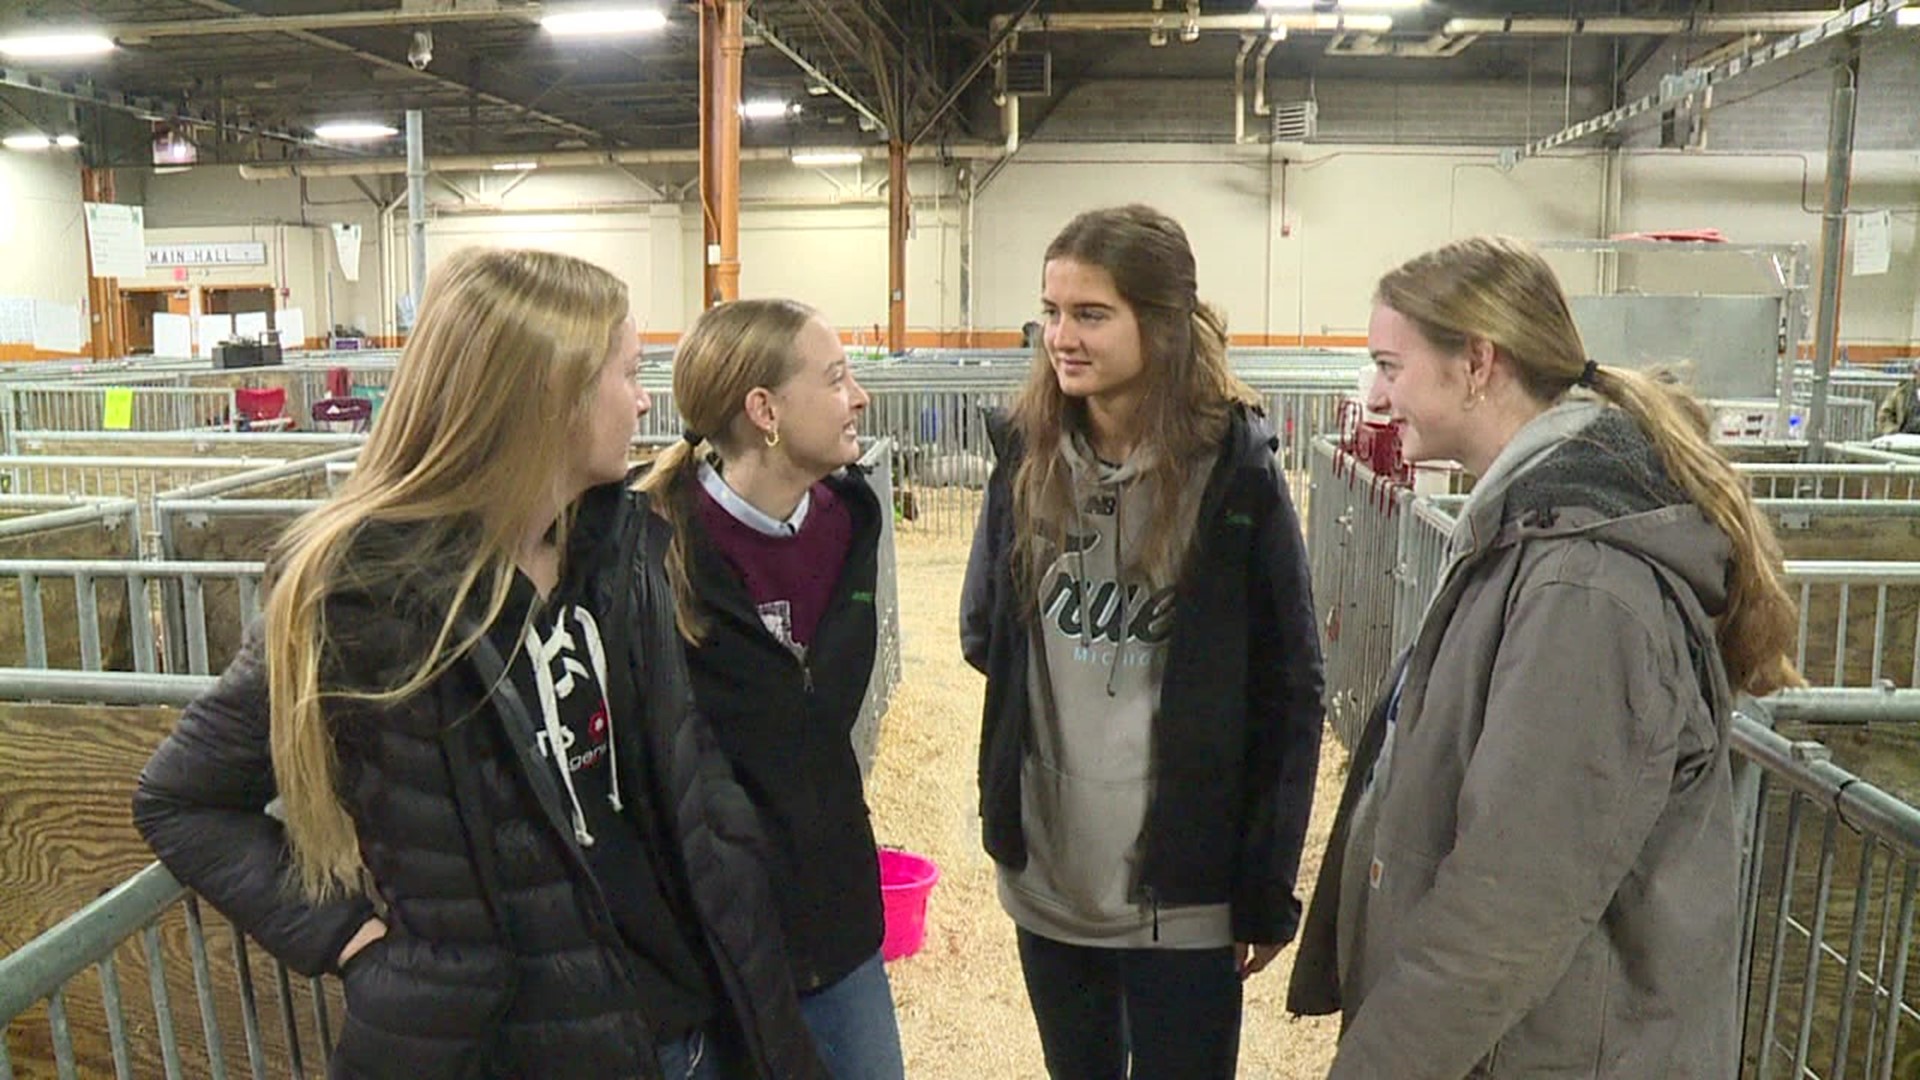 Newswatch 16 met quadruplet sisters and Chester County high school seniors, who have been showing animals together since they were 8 years old.